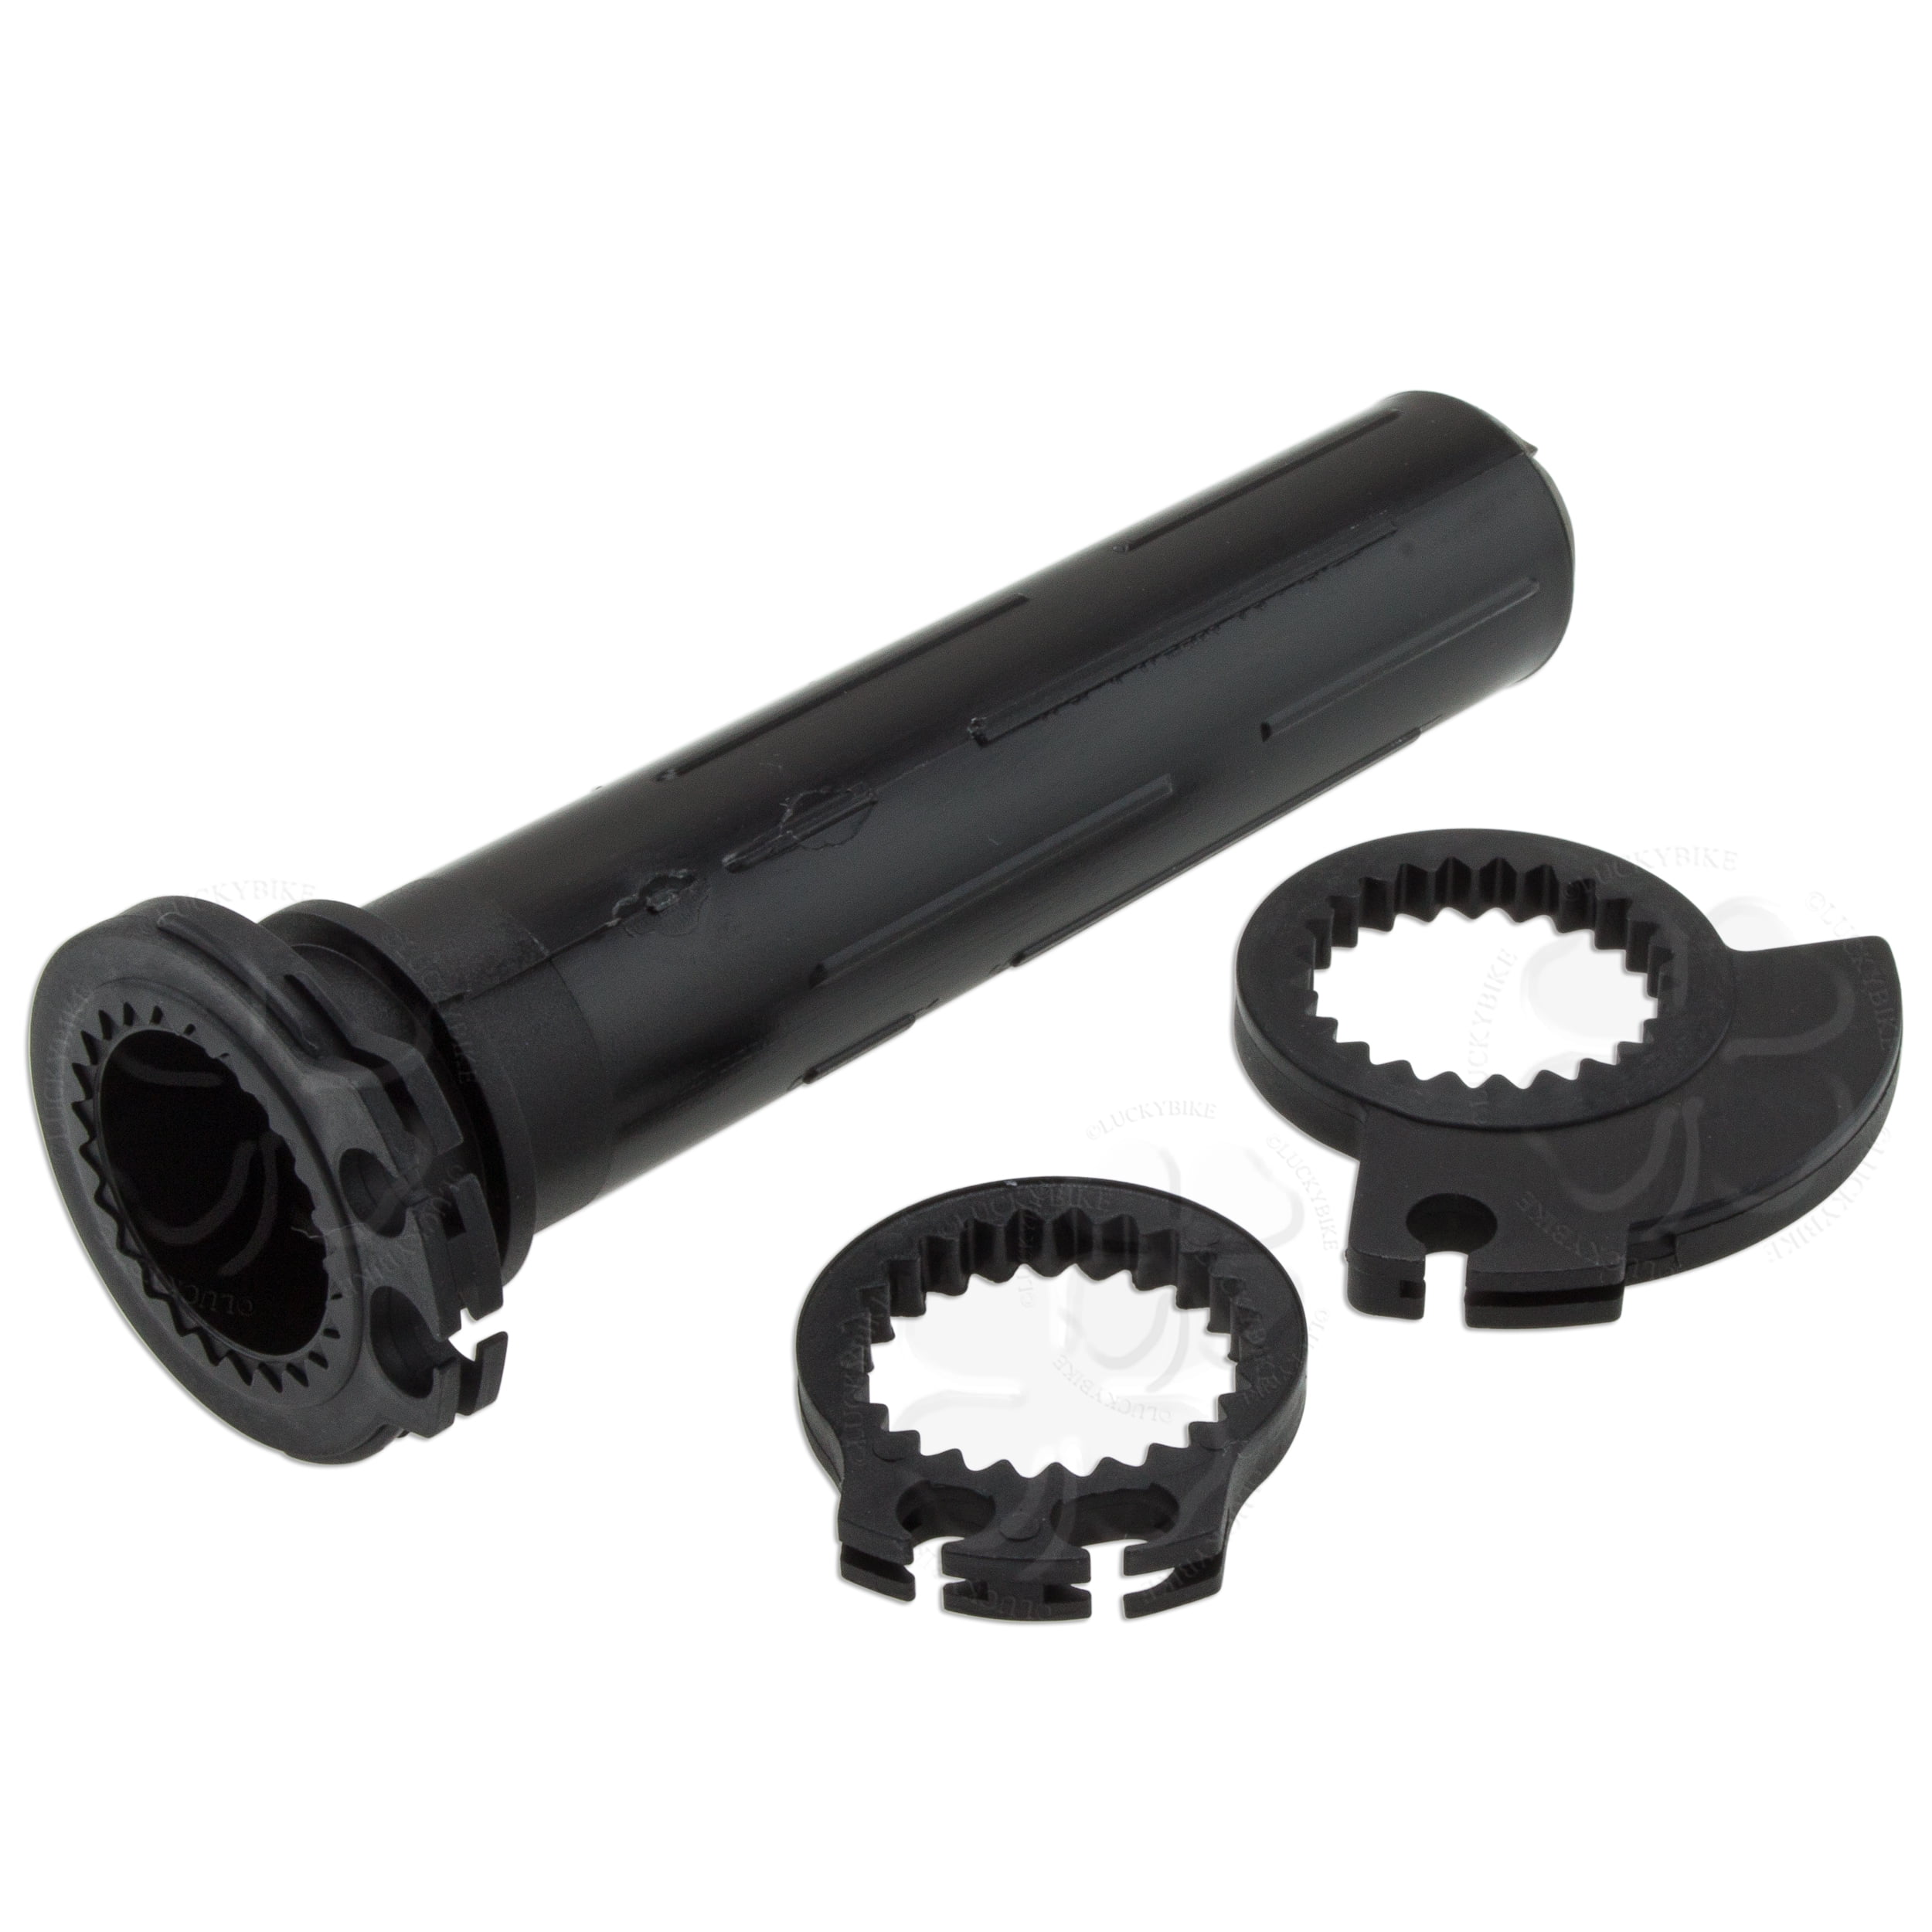 Handle Grip with 1//4 Quick Turn Throttle Dirt Pit Trail Bike 7//8/" Hand Grips